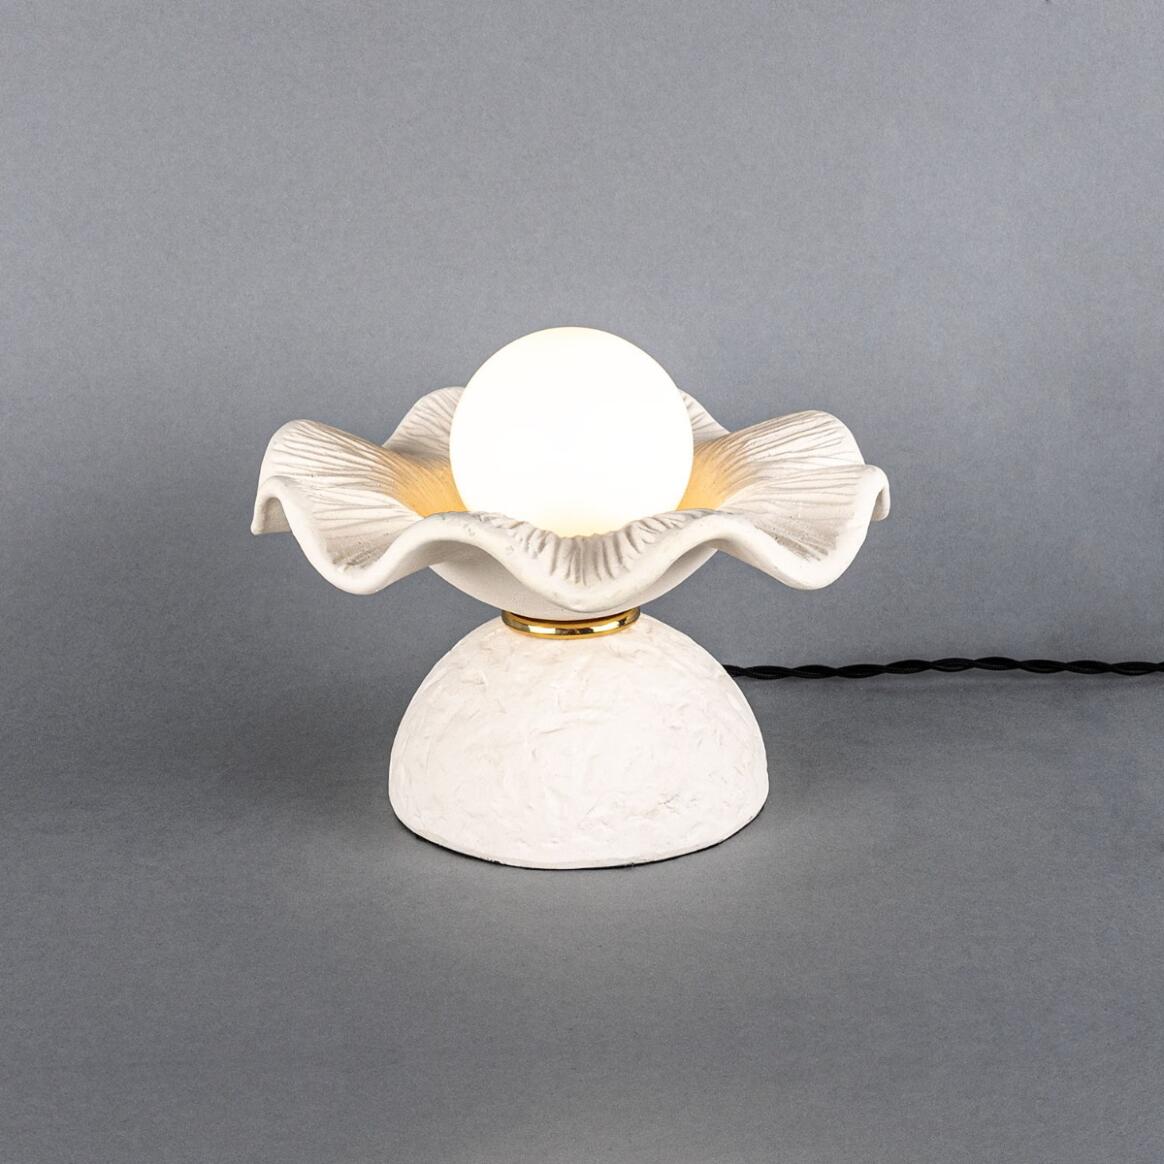 Rivale Table Lamp with Wavy Ceramic Shade, Matte White Striped main product image